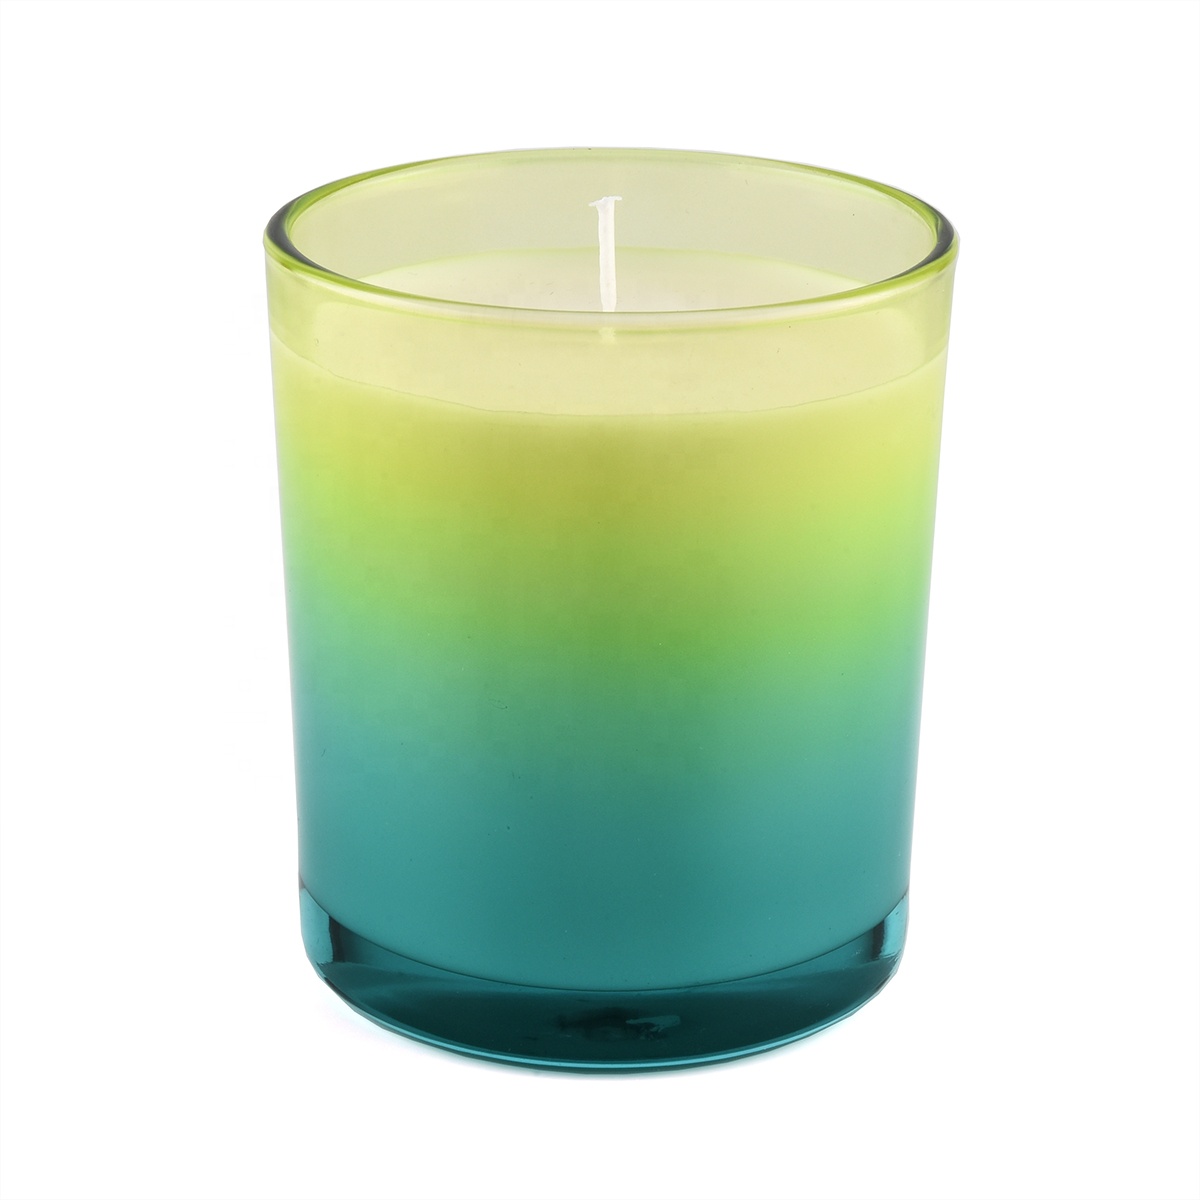 New candle development glass candle jars with gradient color